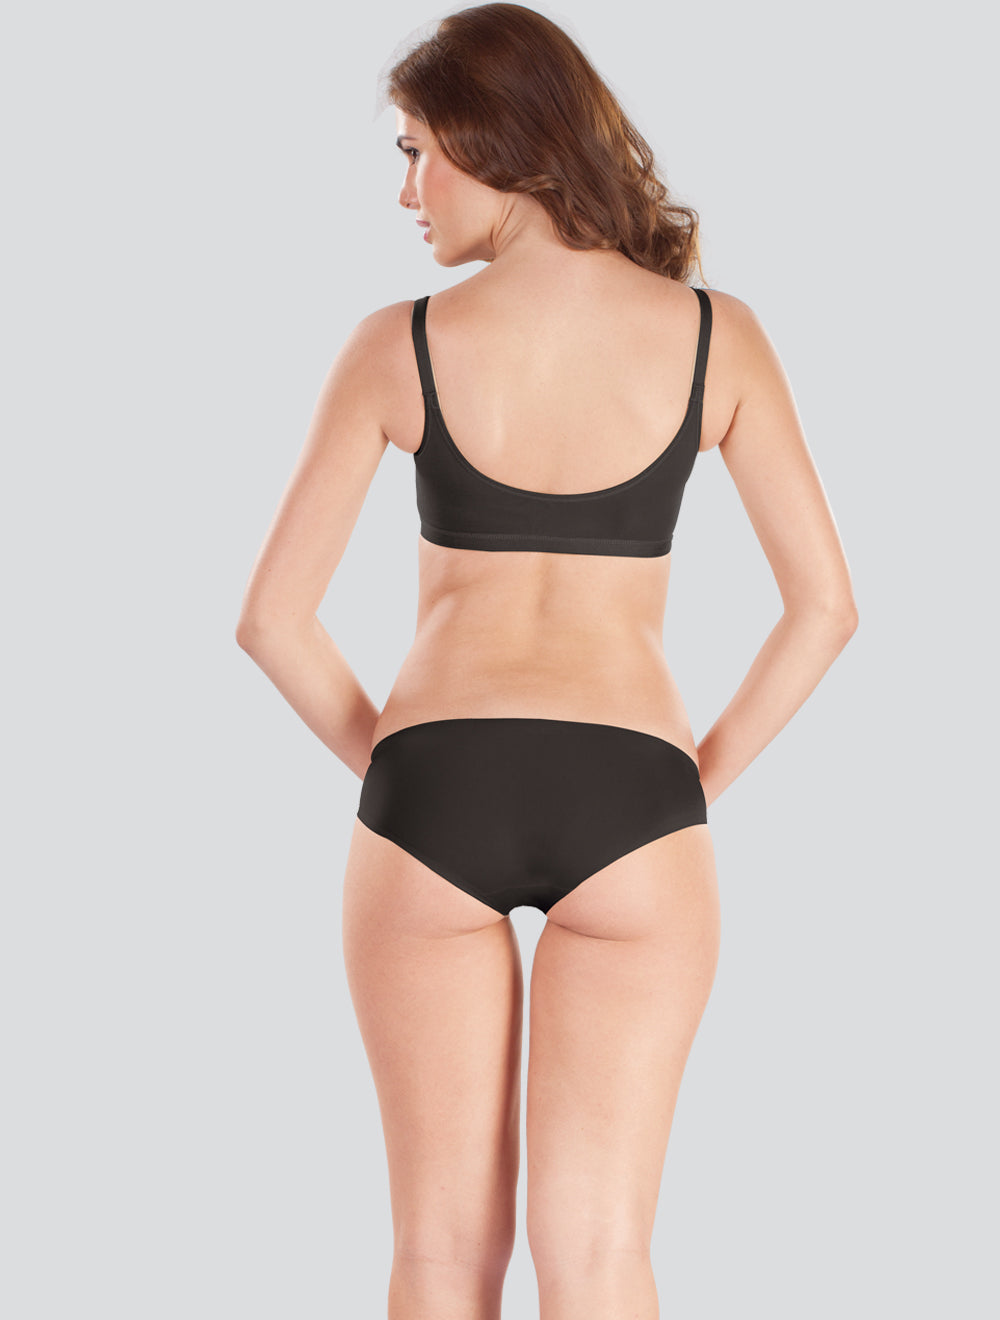 Dermawear Women's Ally Plus Support Bust Shaper at Rs 610.00, Ladies Body  Shaper